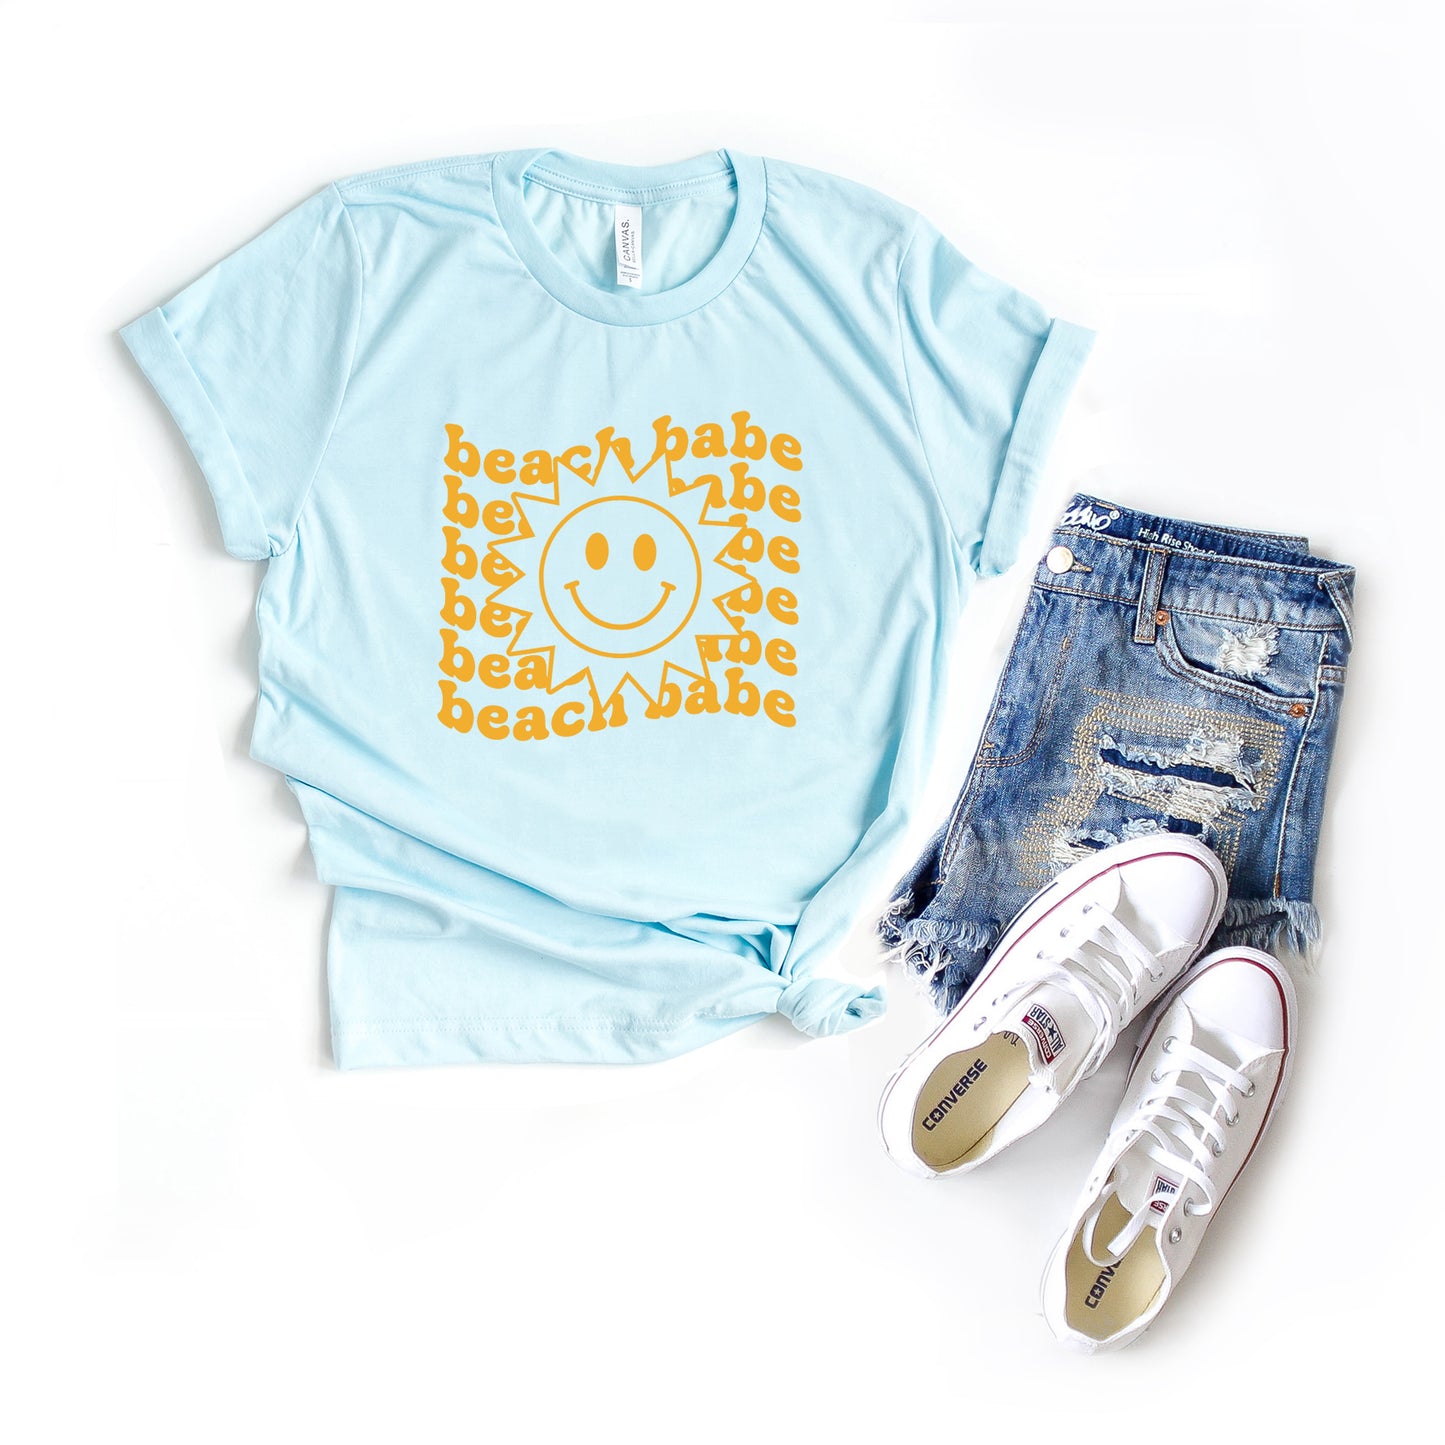 Beach Babe Stacked With Sun | Short Sleeve Graphic Tee